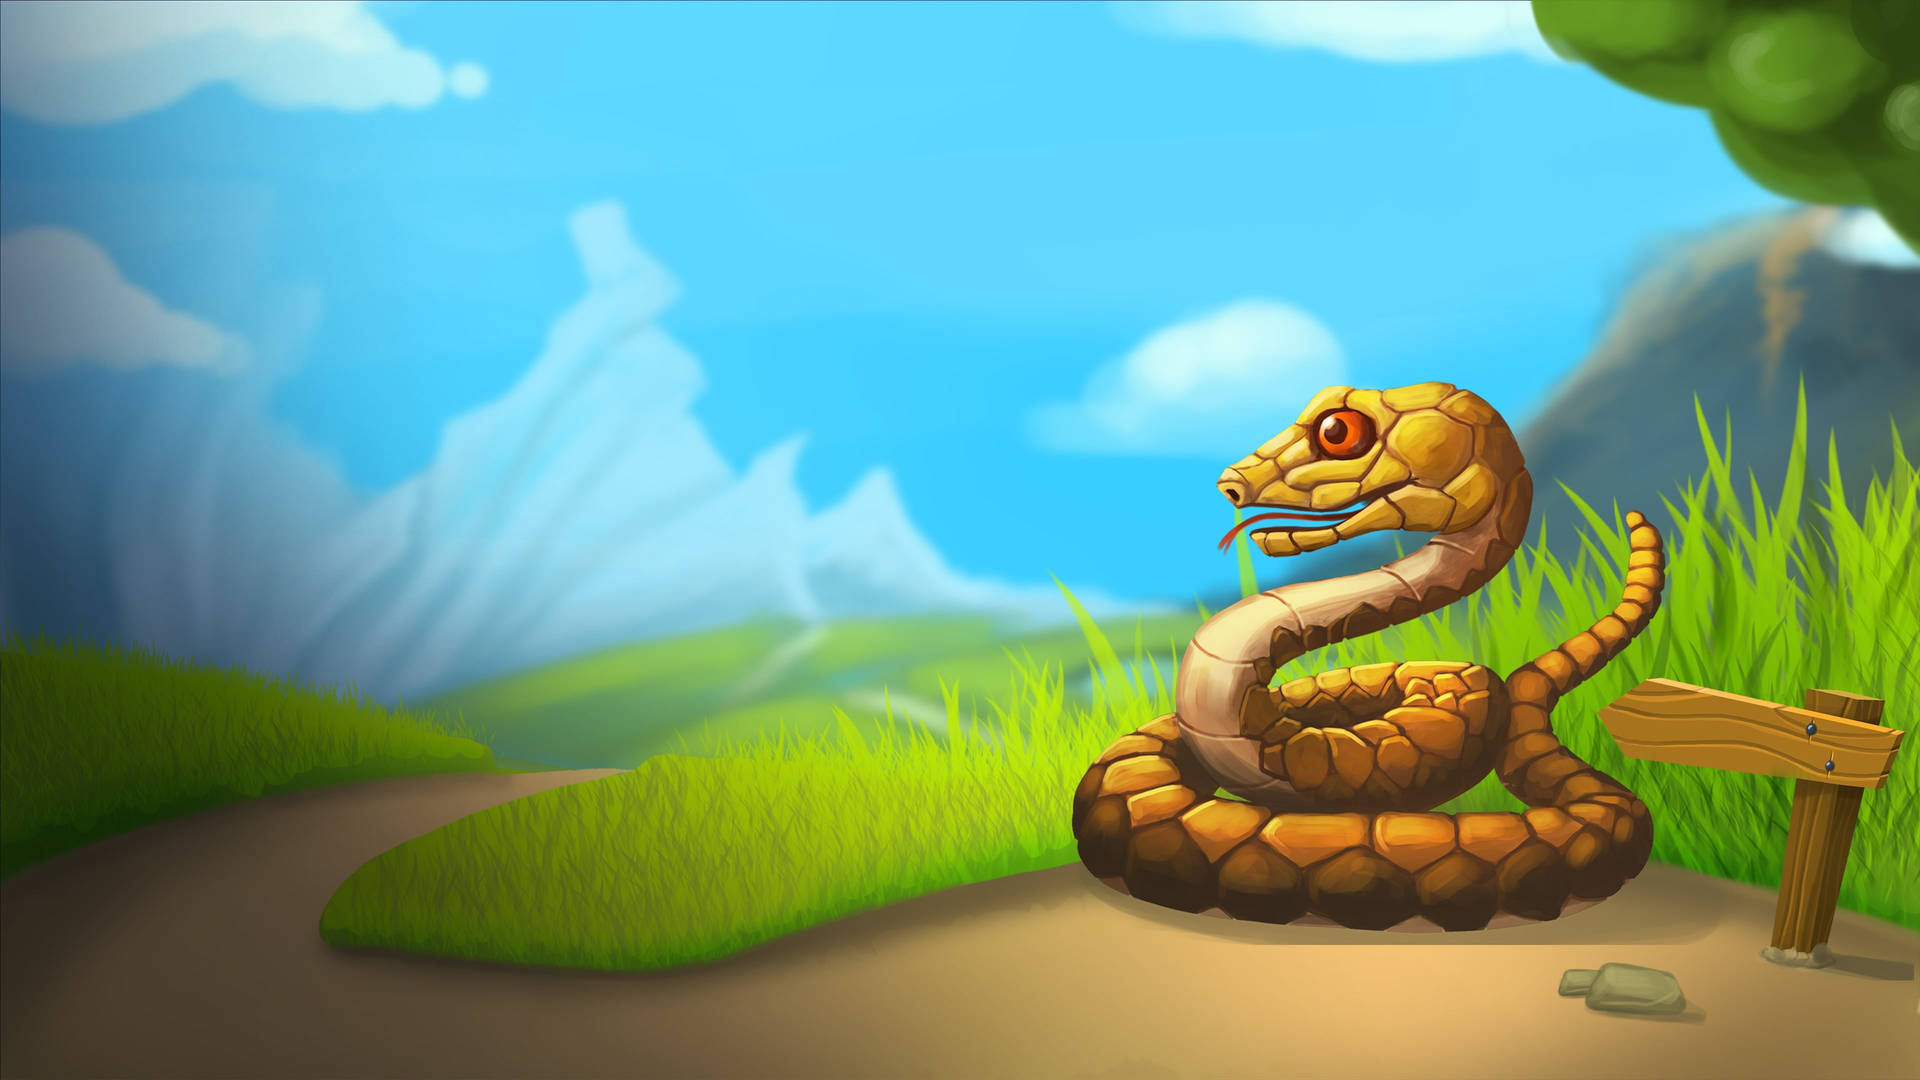 Clear Snake Game Character Wallpaper